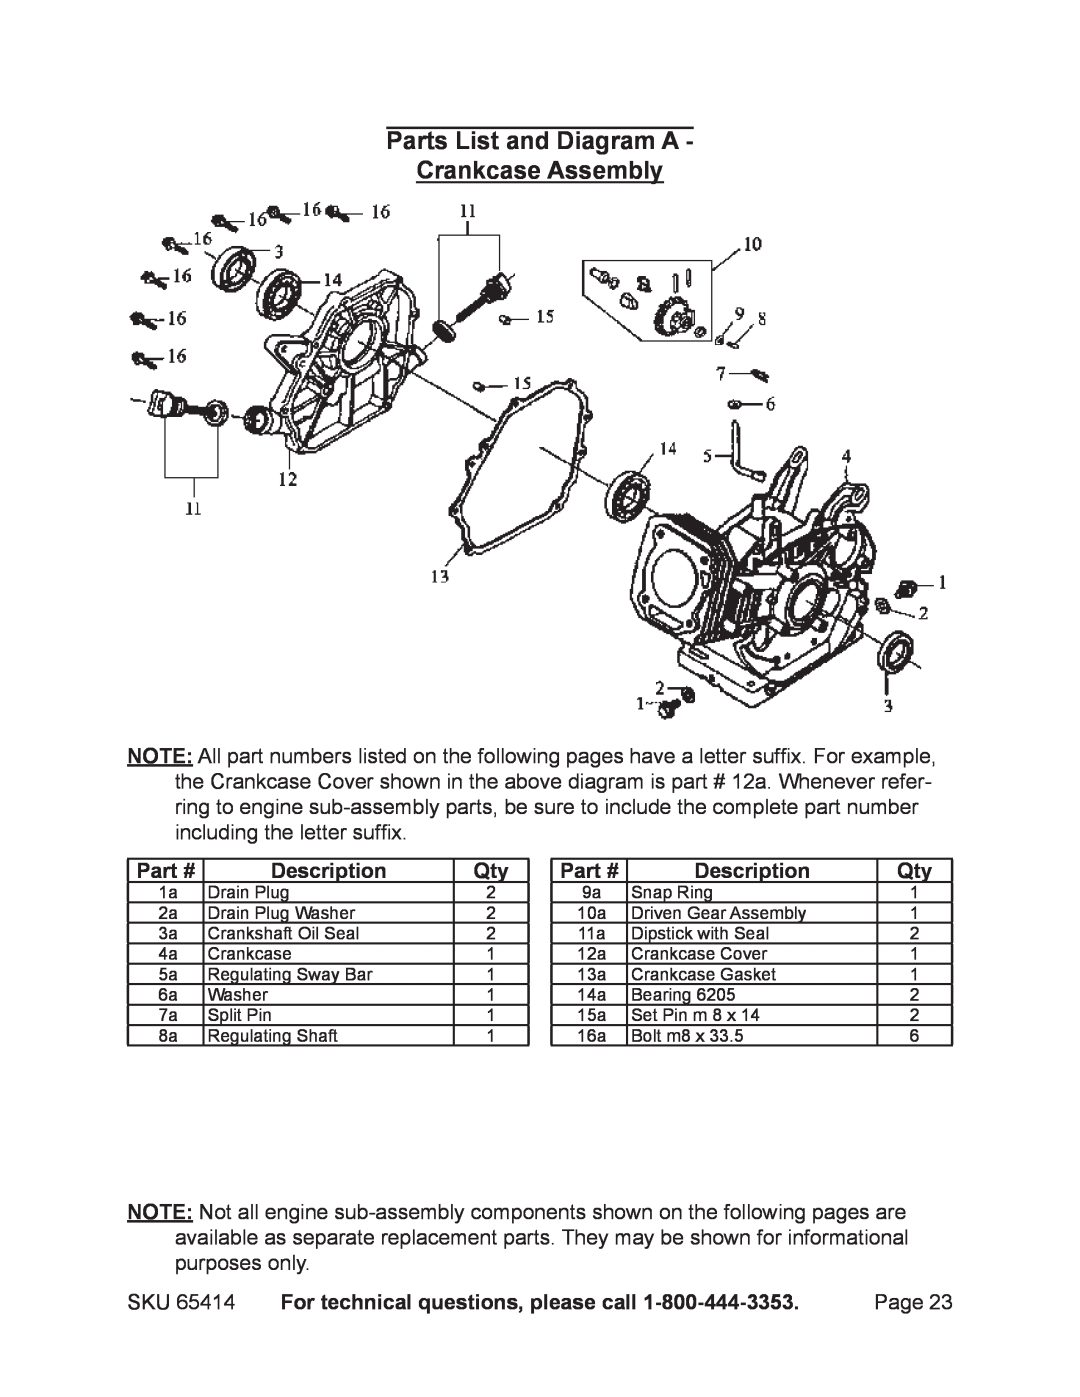 Chicago Electric 65414 Parts List and Diagram A Crankcase Assembly, Description, For technical questions, please call 